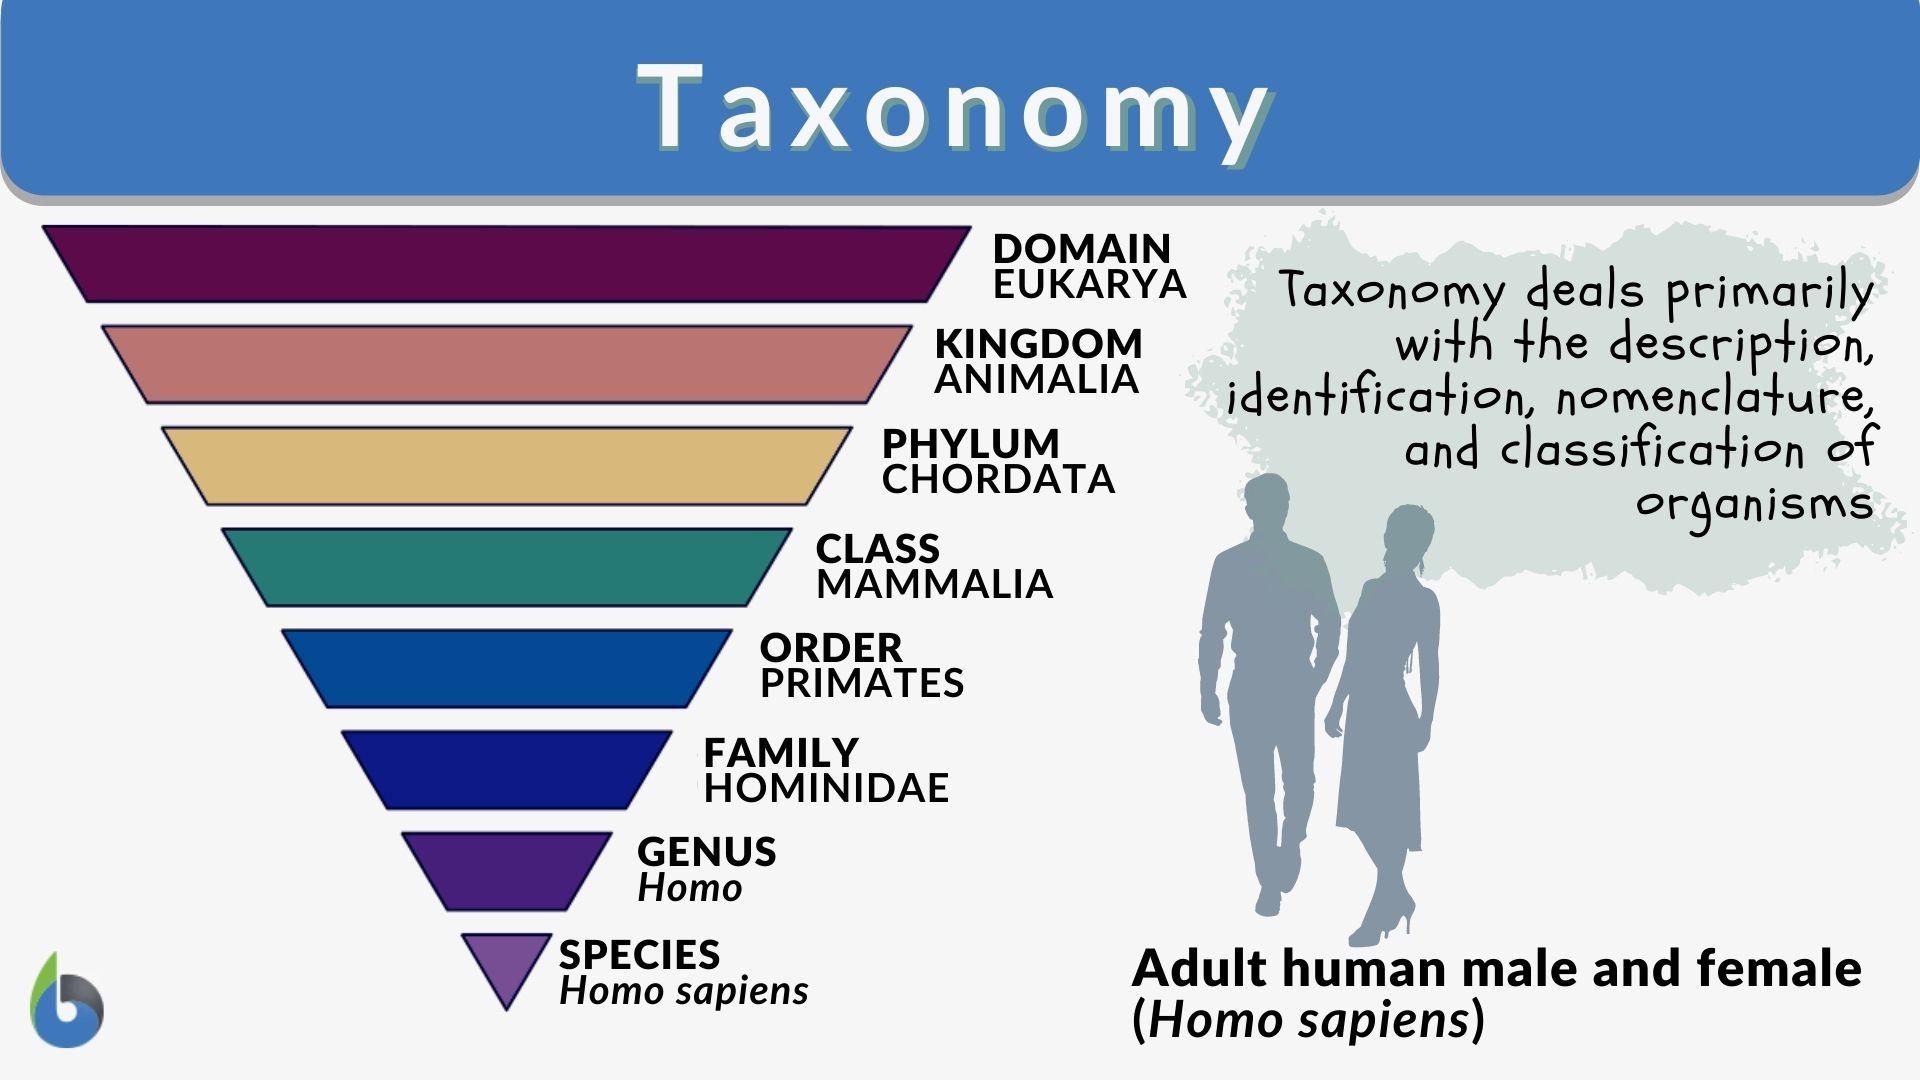 2. Key Elements of the Taxonomy and How They Can Transform Reporting